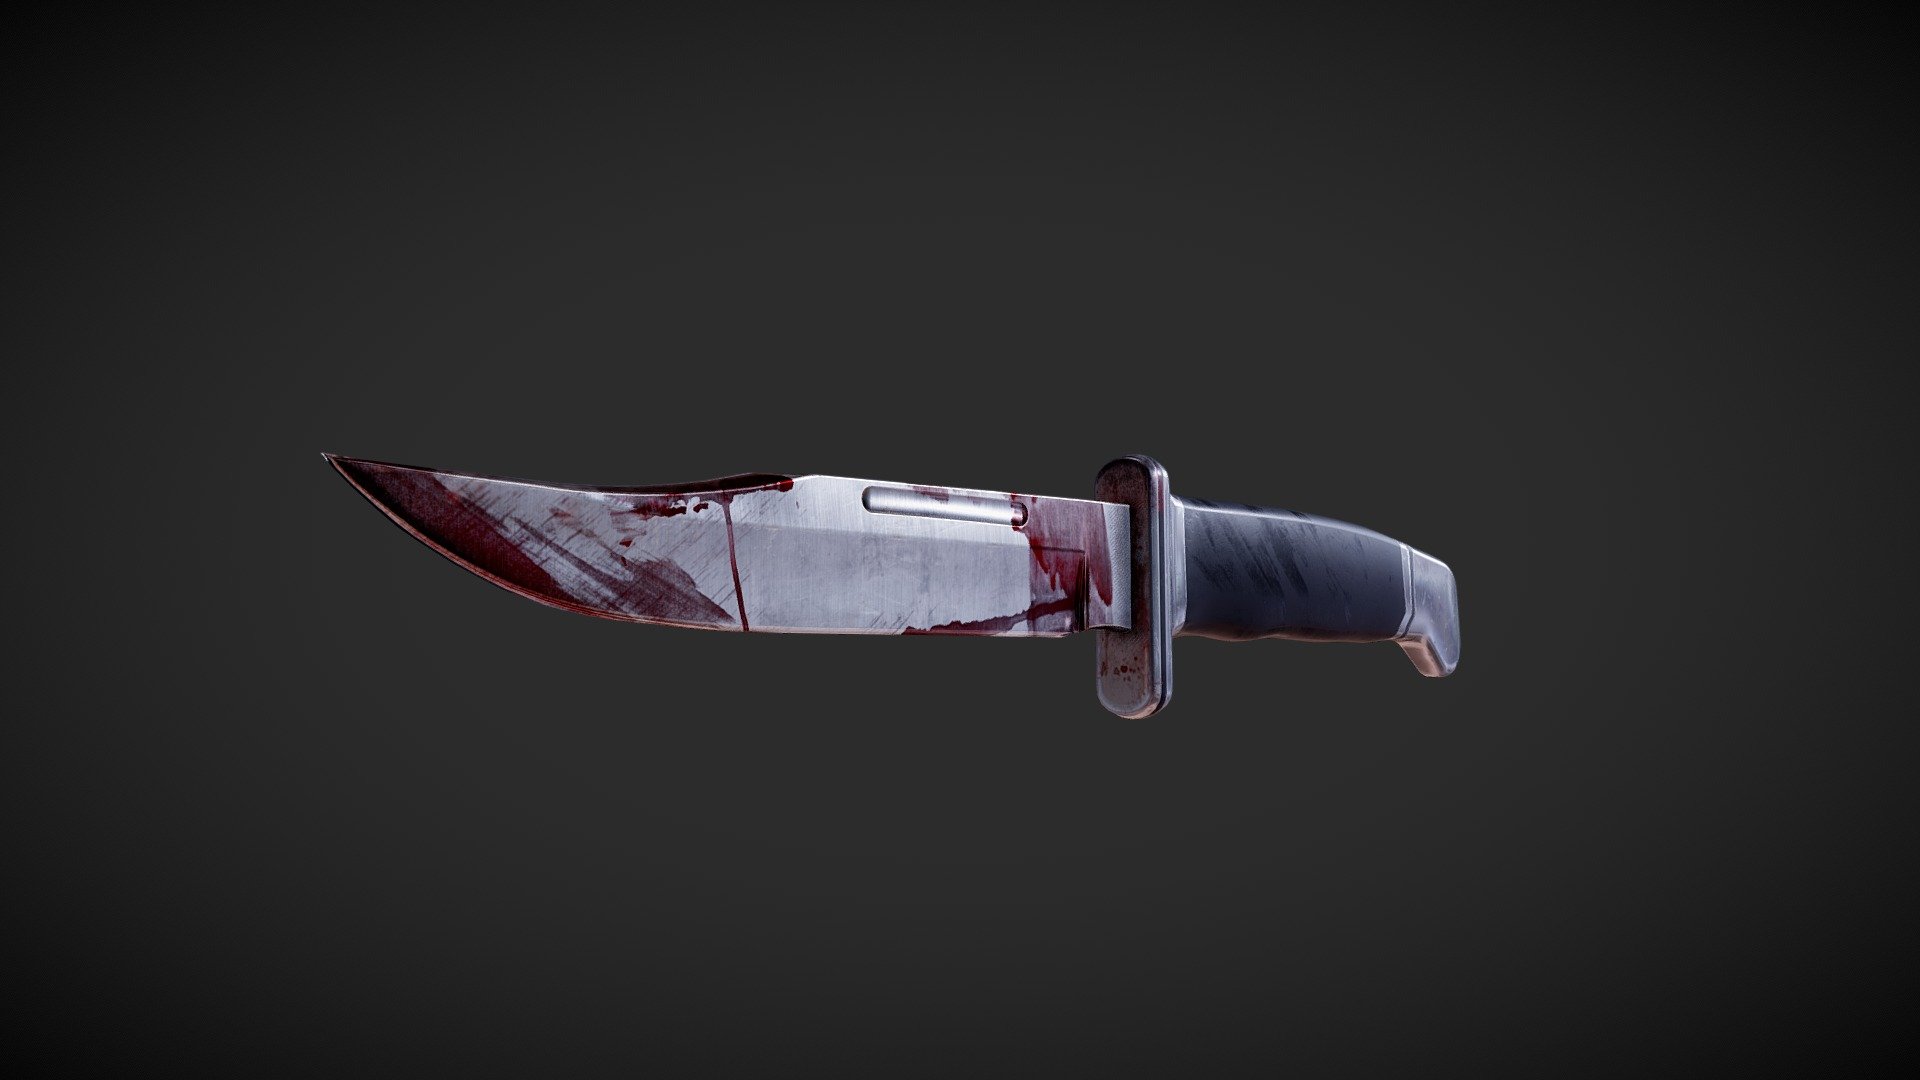 My wife and I recently watched the new Scream movie, and therefore I decided to try and recreate the iconic Ghostface knife also known as a Buck 120. 

I've created to versions of the knife - One with blood and one without. The model was crafted in Blender and textured in Substance Painter 3D.

2874 Tris &amp; 4K Textures 3d model